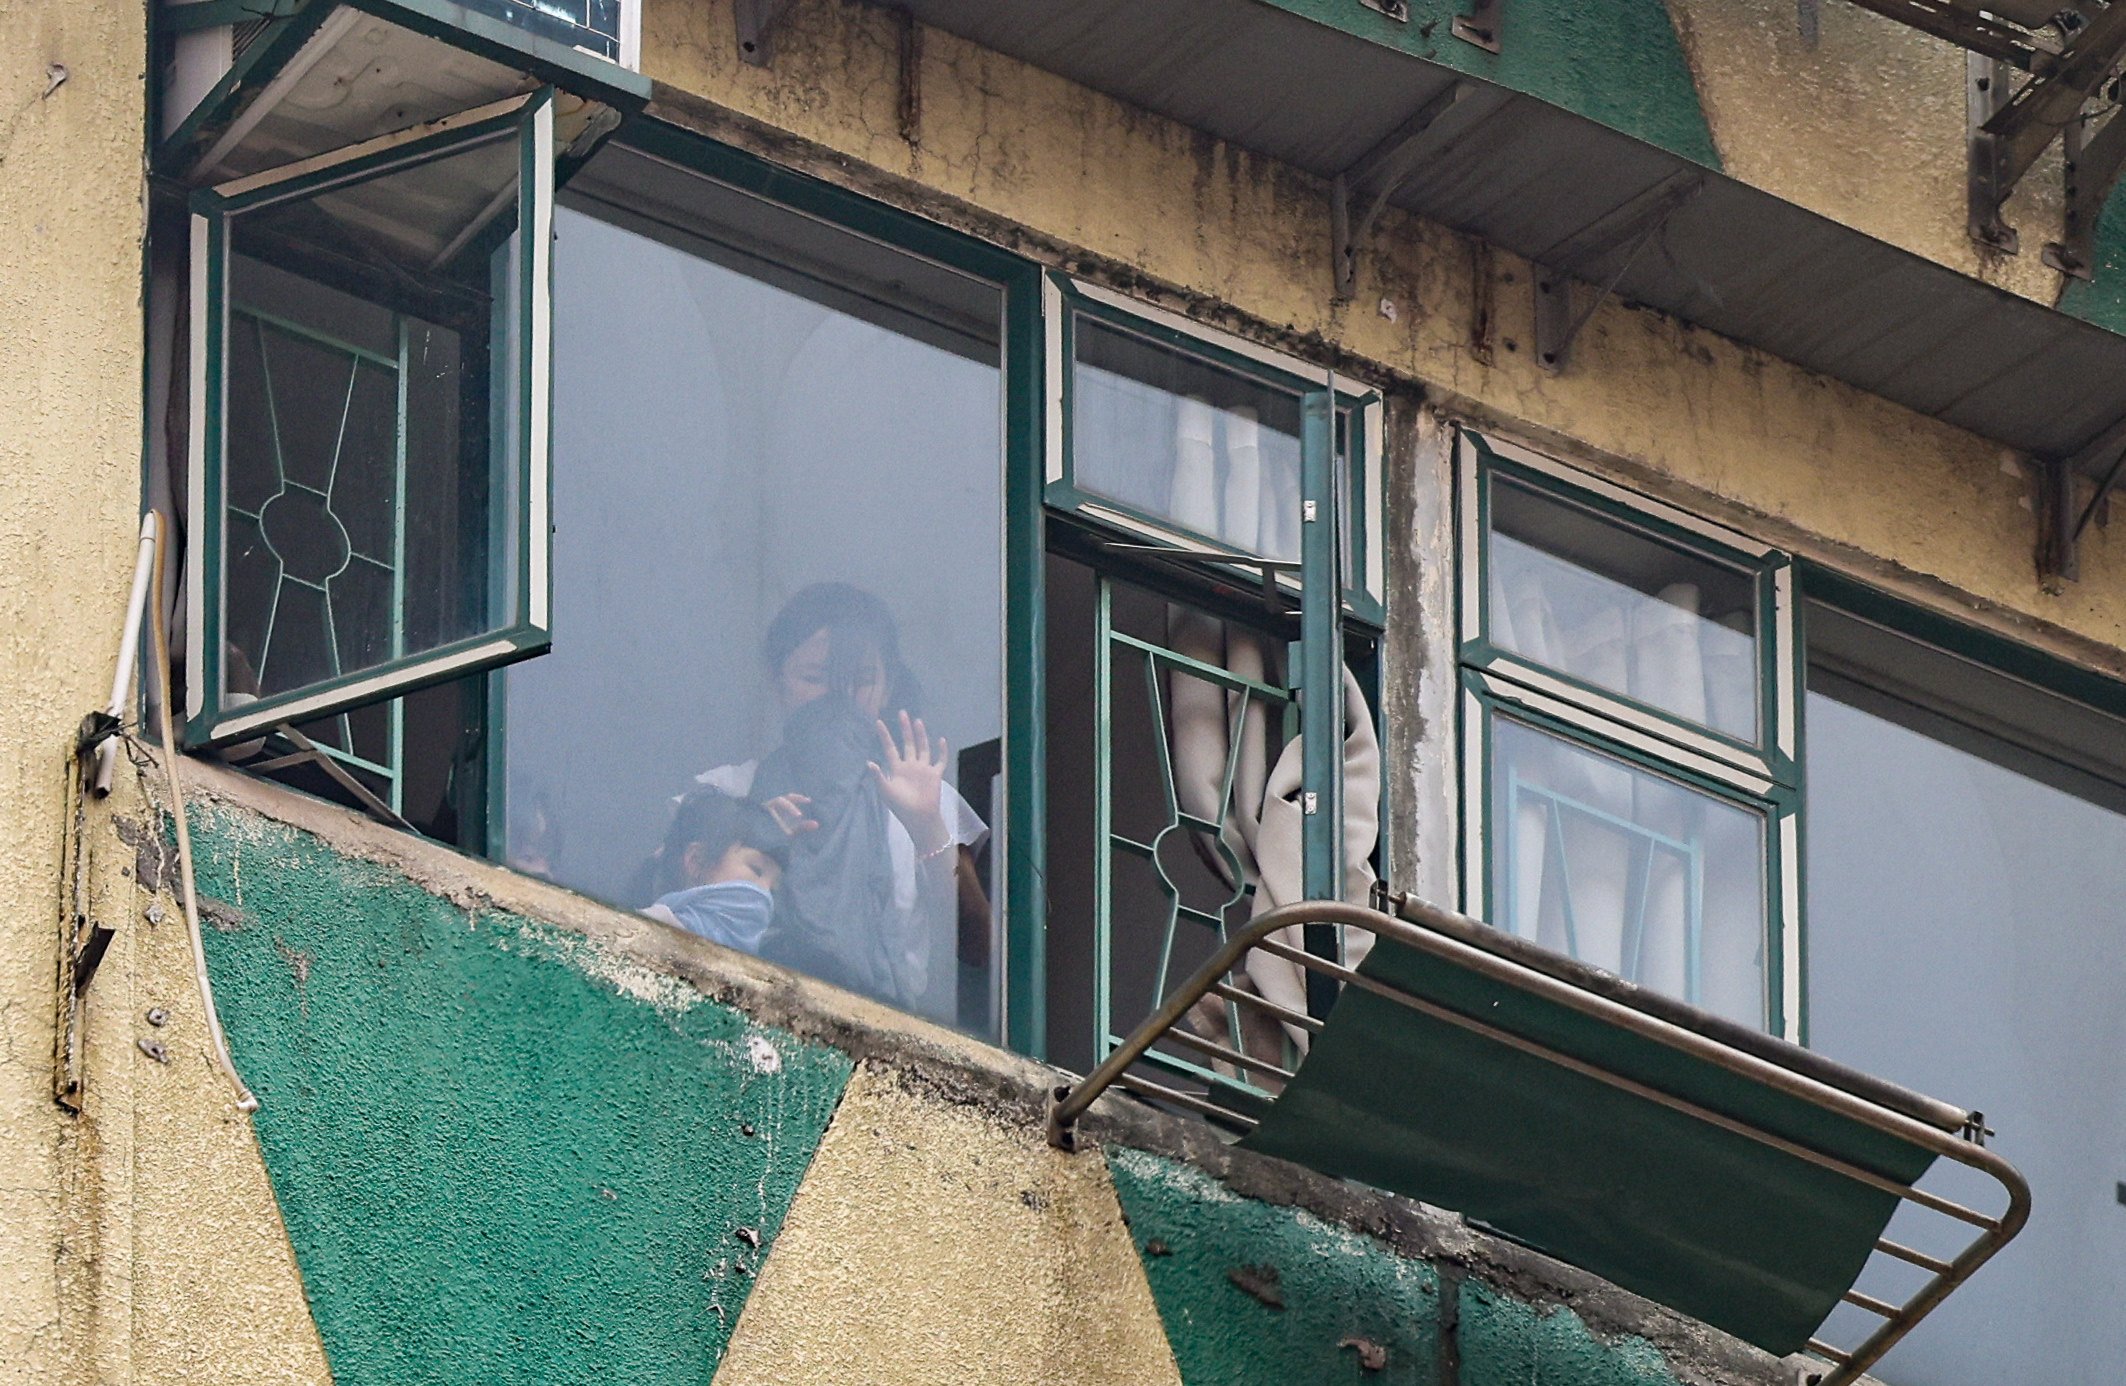 Tenants have described rushing to higher floors to find safety during the blaze. Photo: Jelly Tse